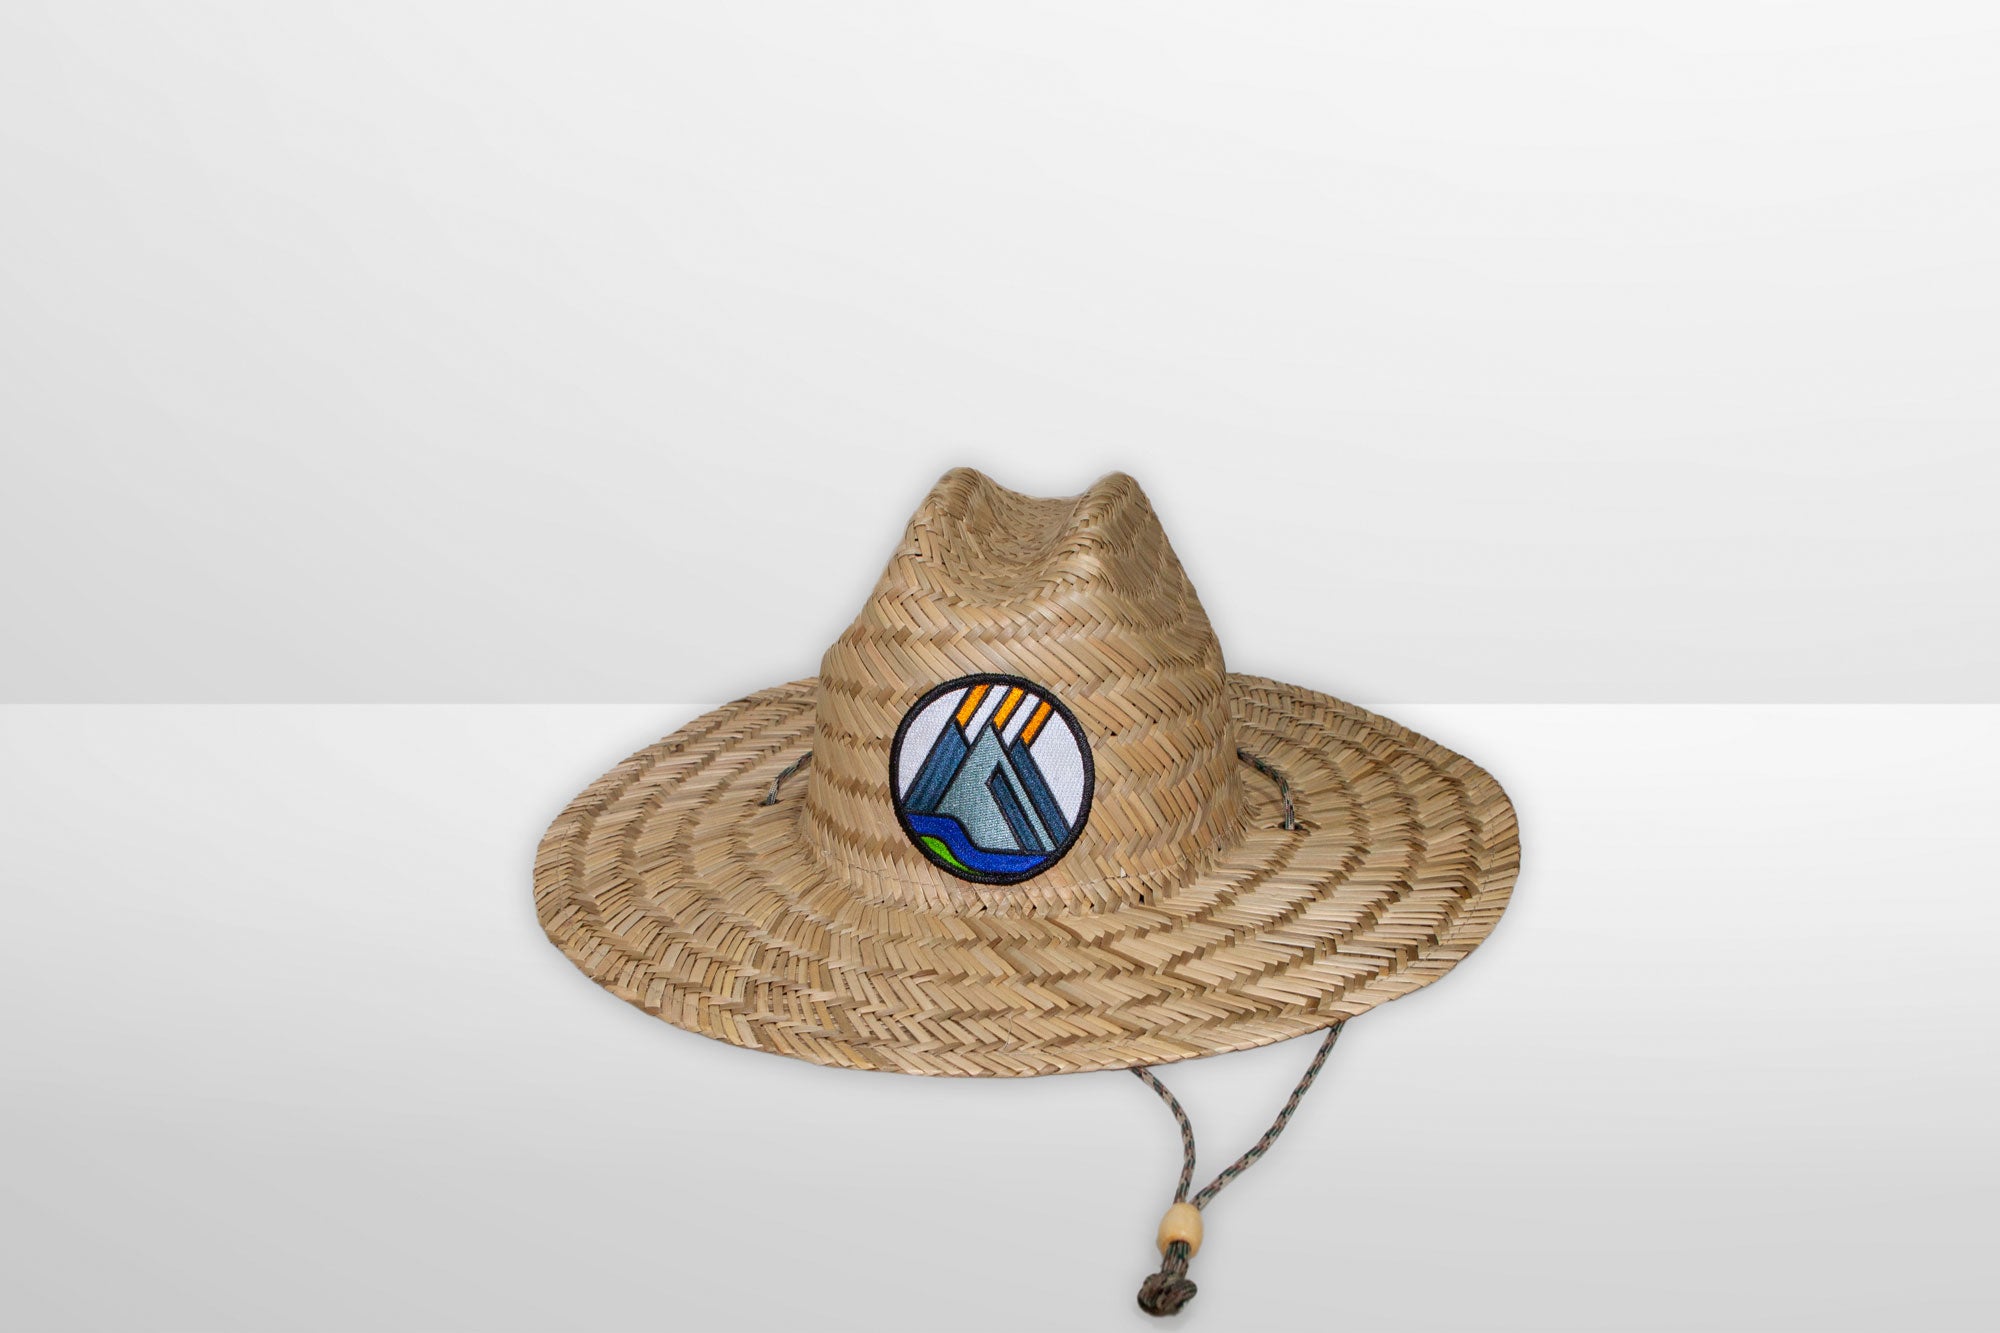 Large Straw Summer Sun Hat with All Black American Flag Patch - Great